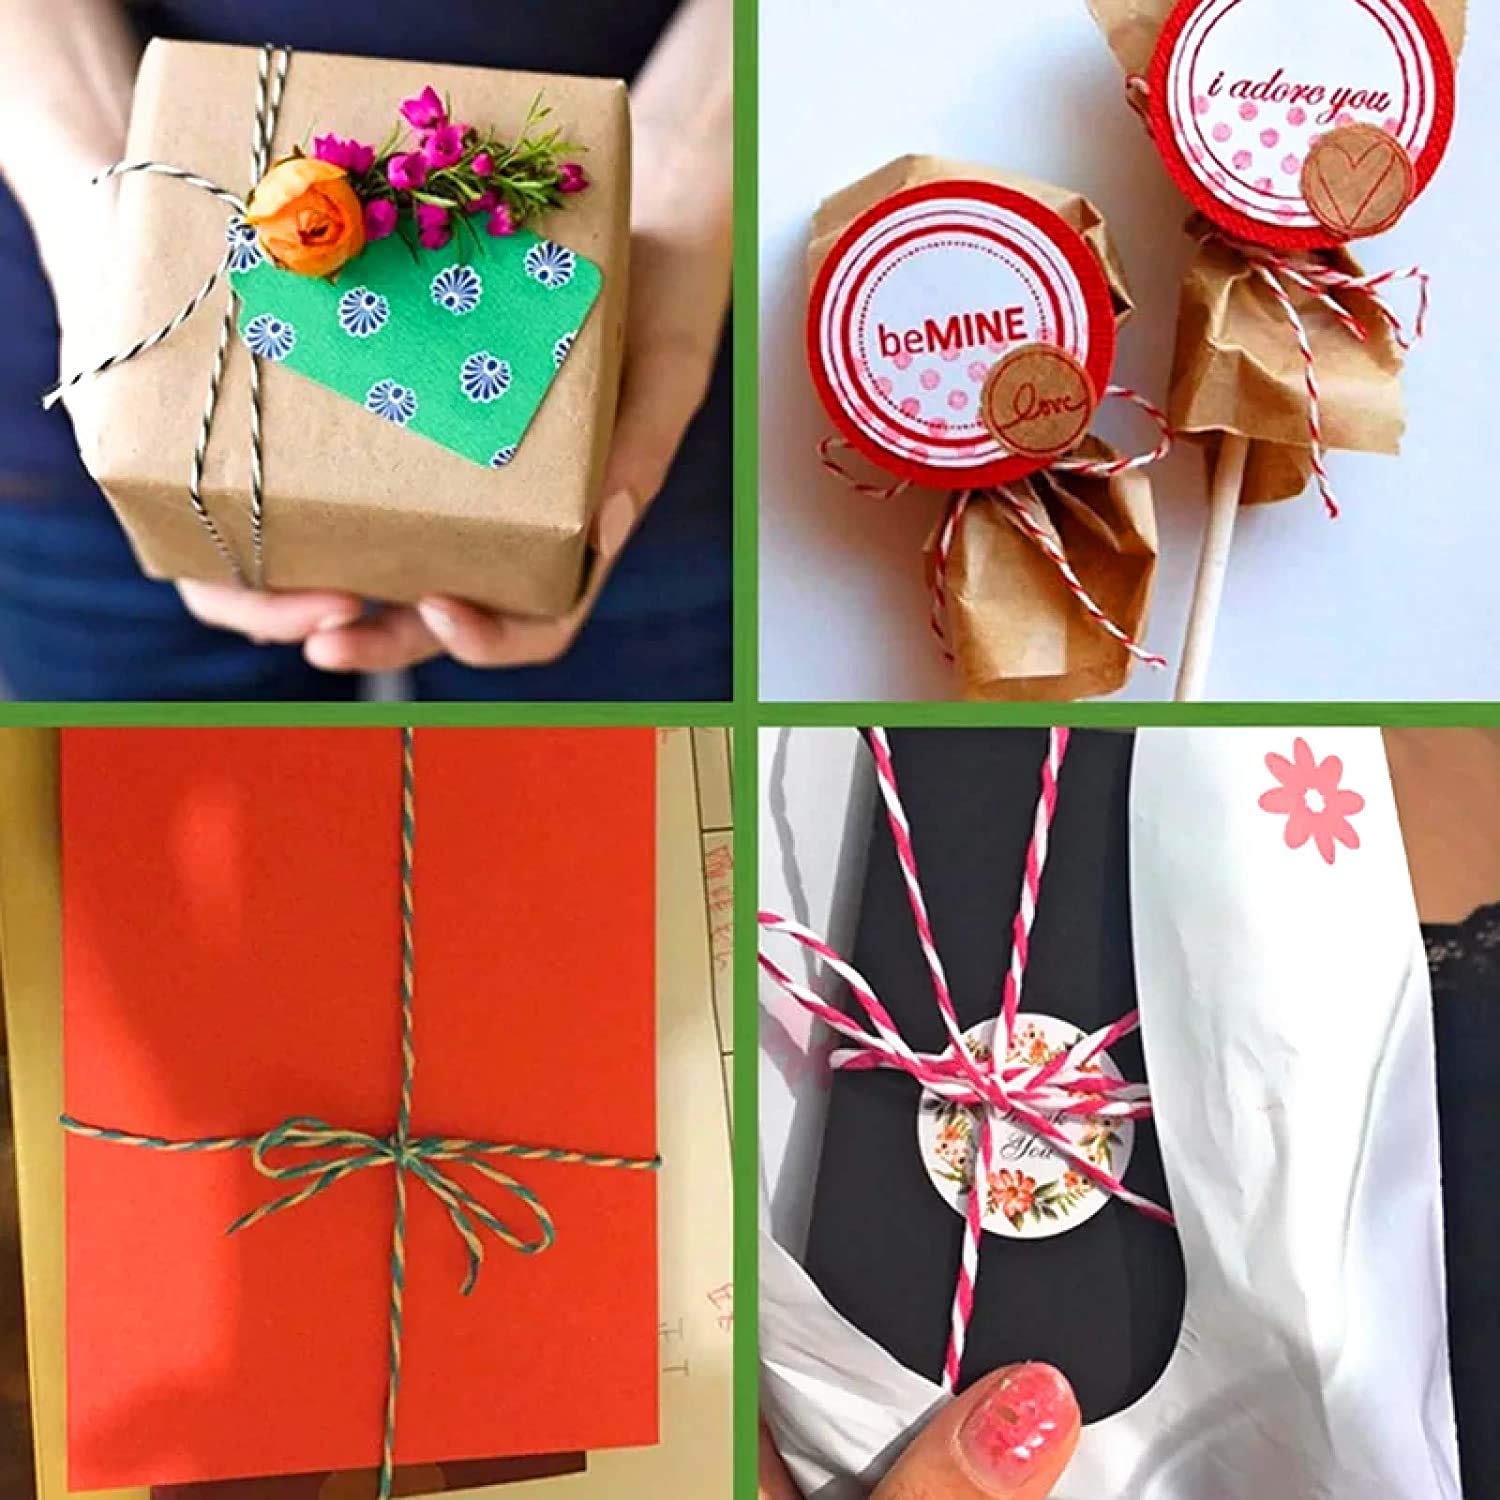 Easy Paper Gift Box Tutorial | DIY Gifts for Valentine's Day - YouTube